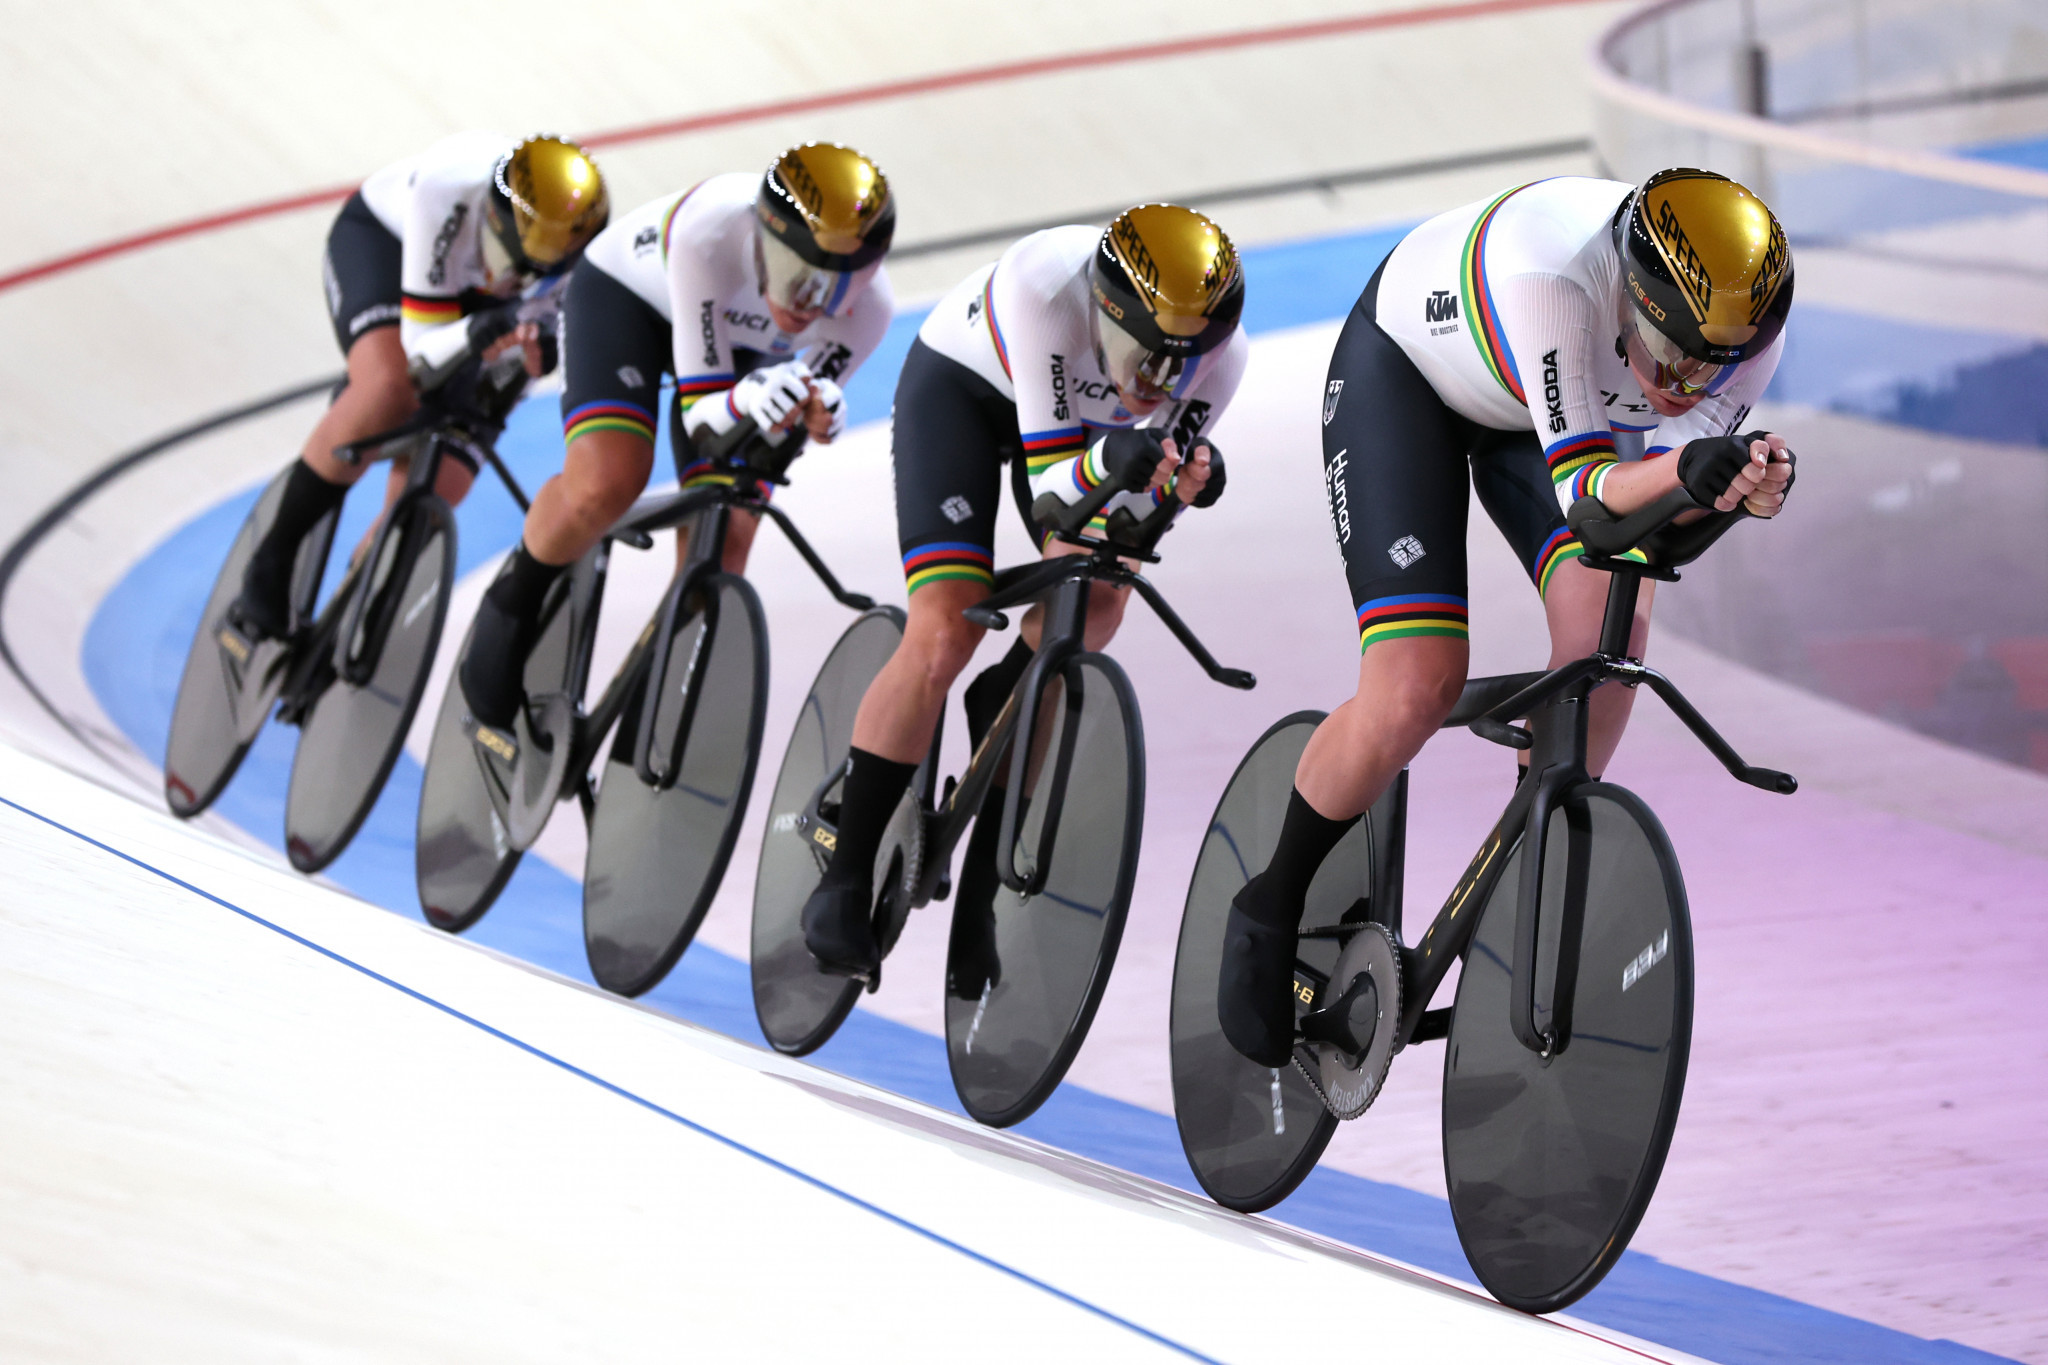 German women topped qualifying in the team sprint and the team pursuit events ©Getty Images